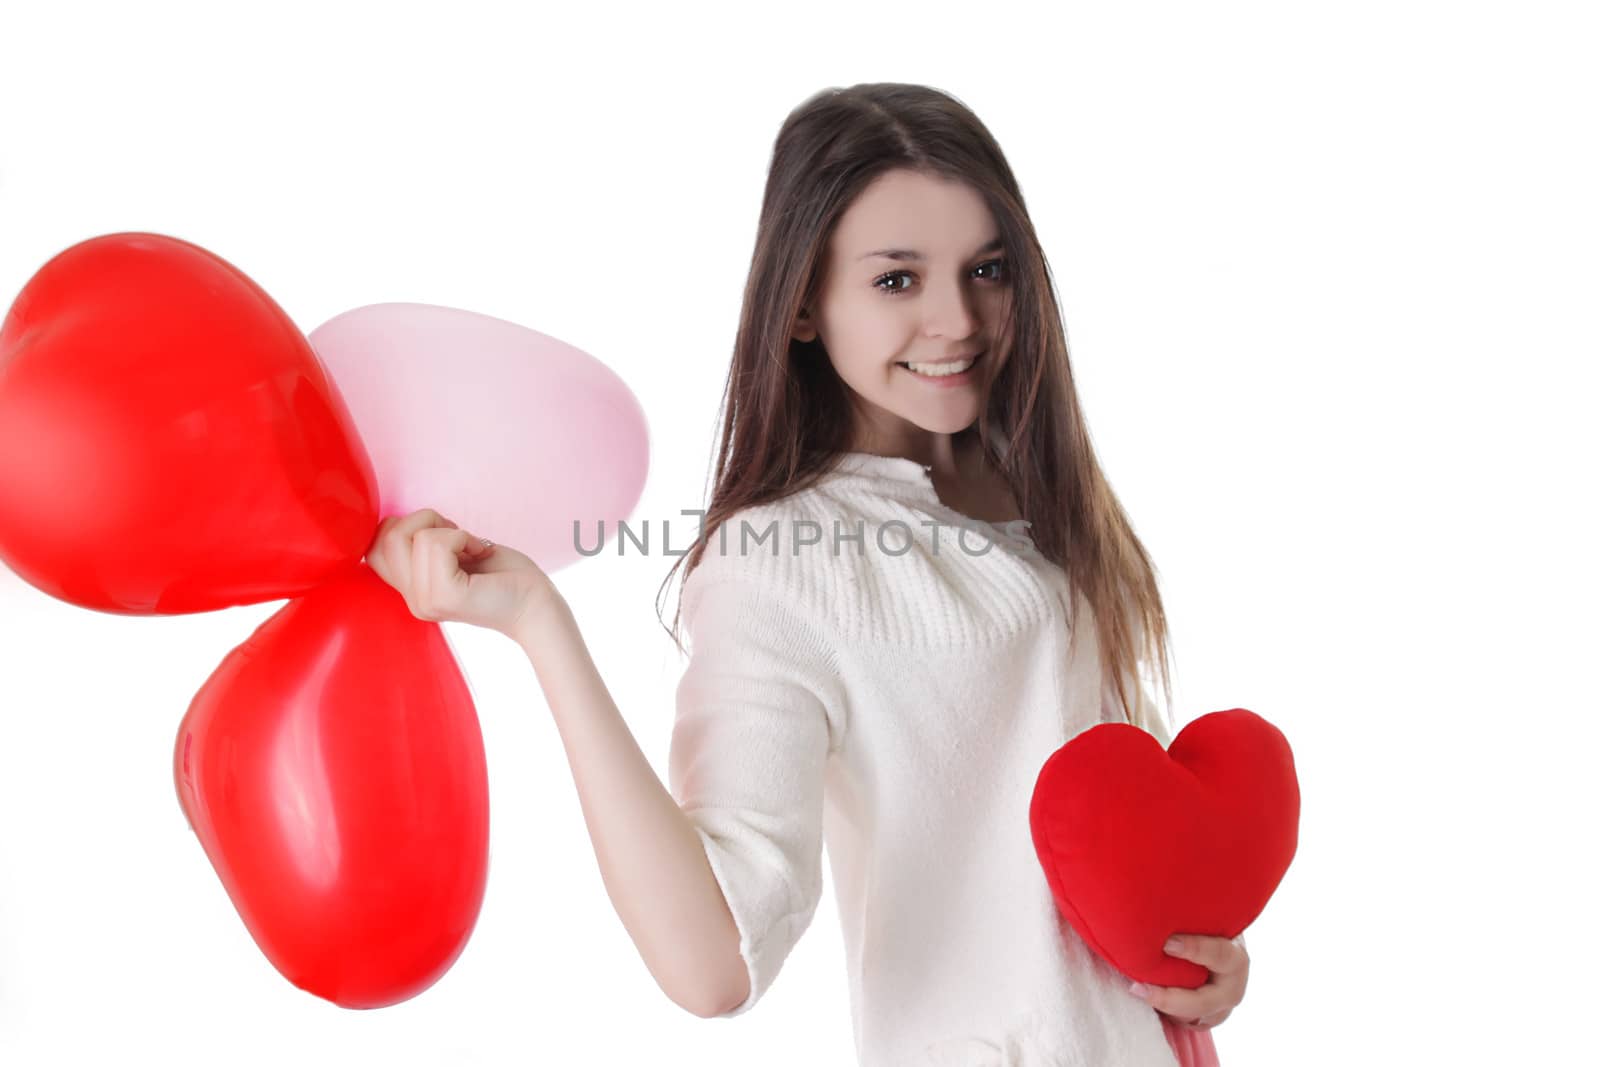 Smiling young girl with balloons and plush heart by Angel_a